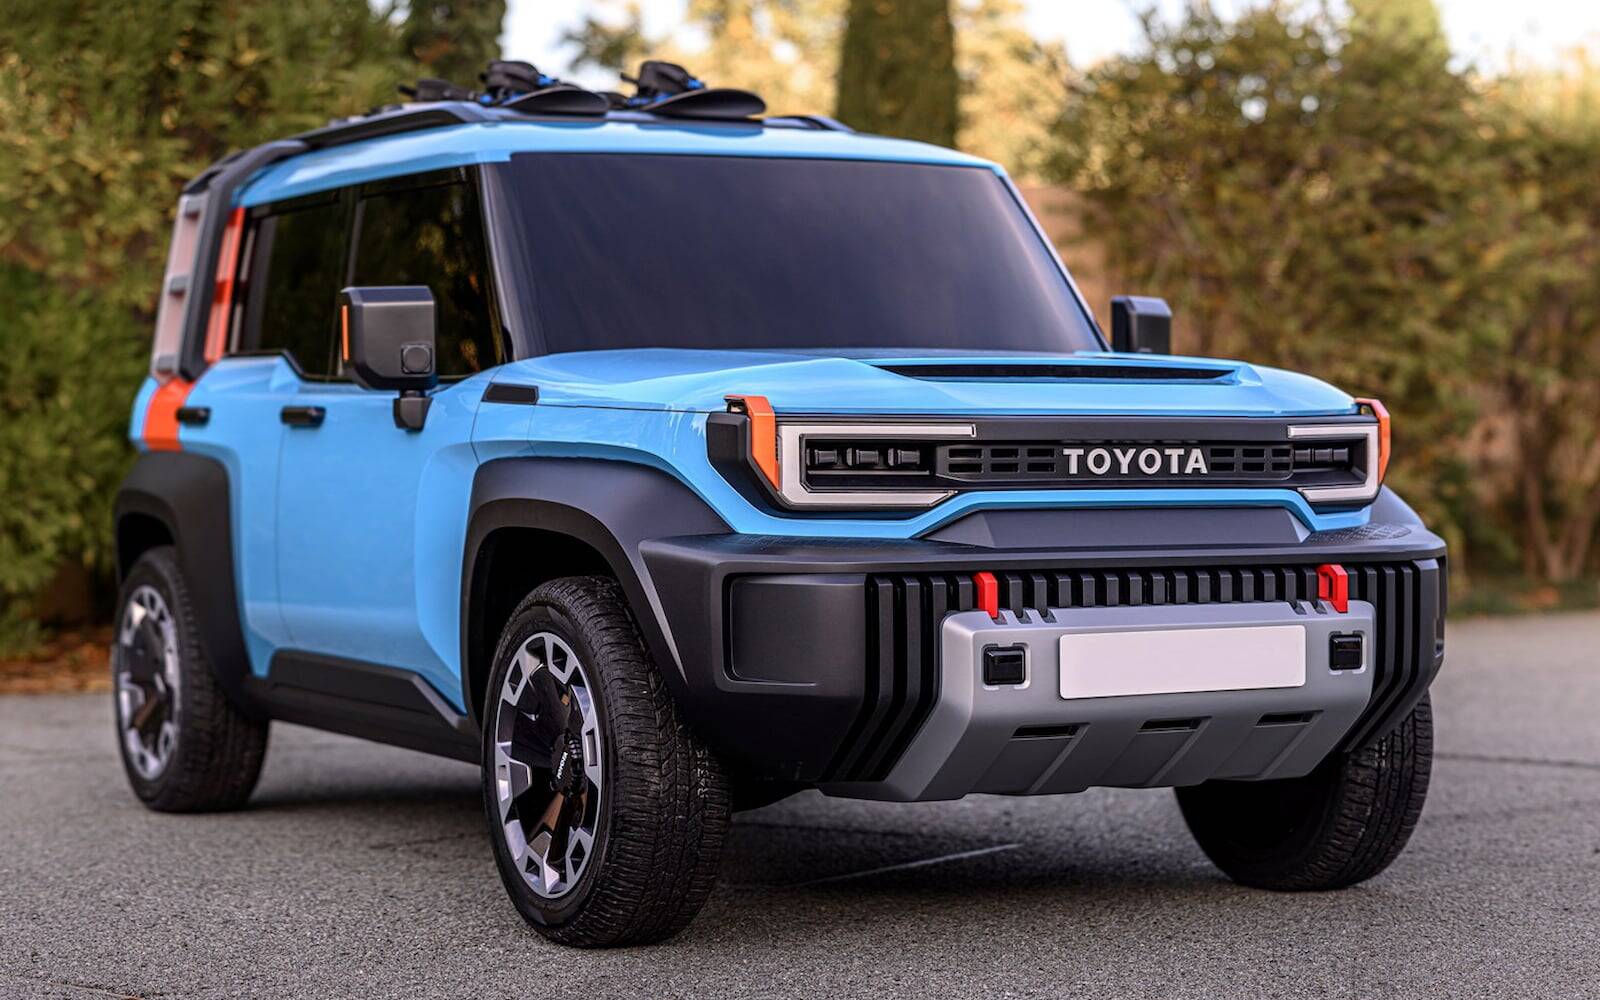 What if Toyota Built This Electric Off-Roader Concept? - The Car Guide